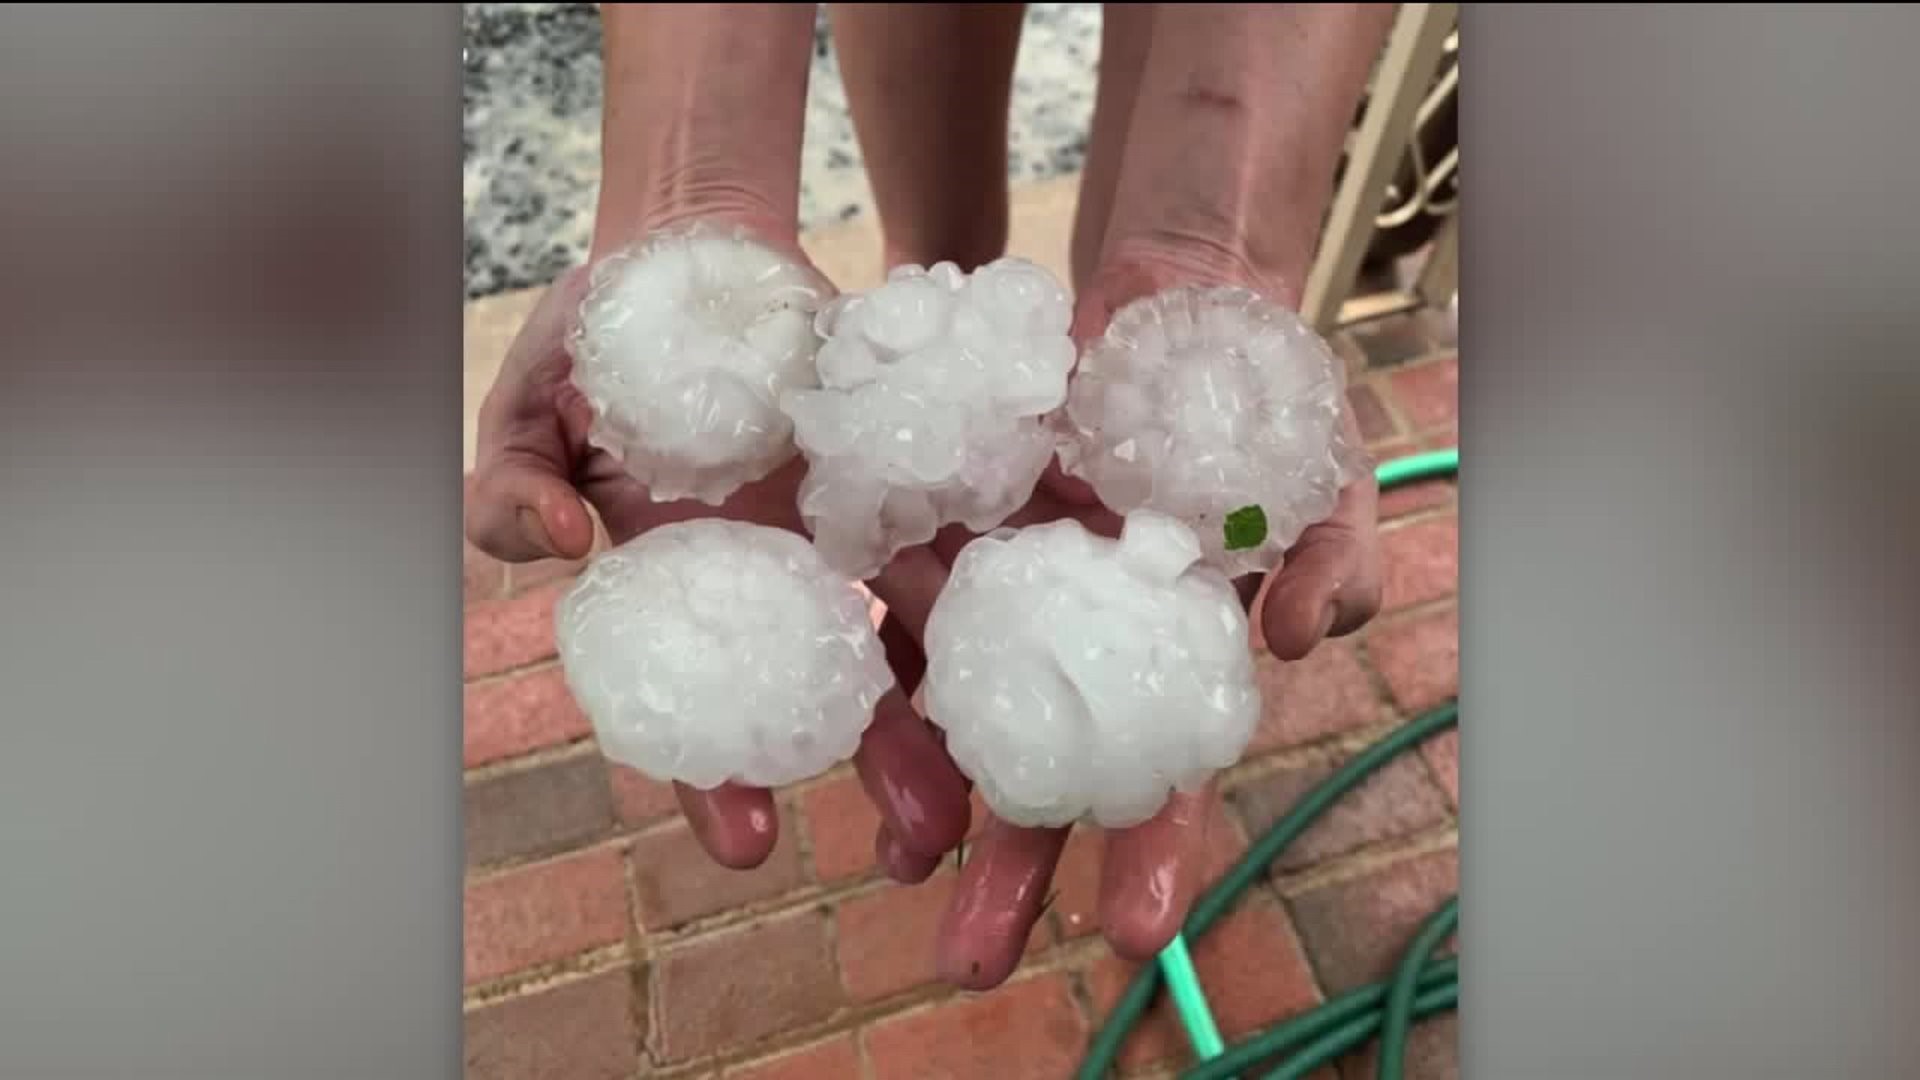 Hail Pummels the Area During Severe Storms